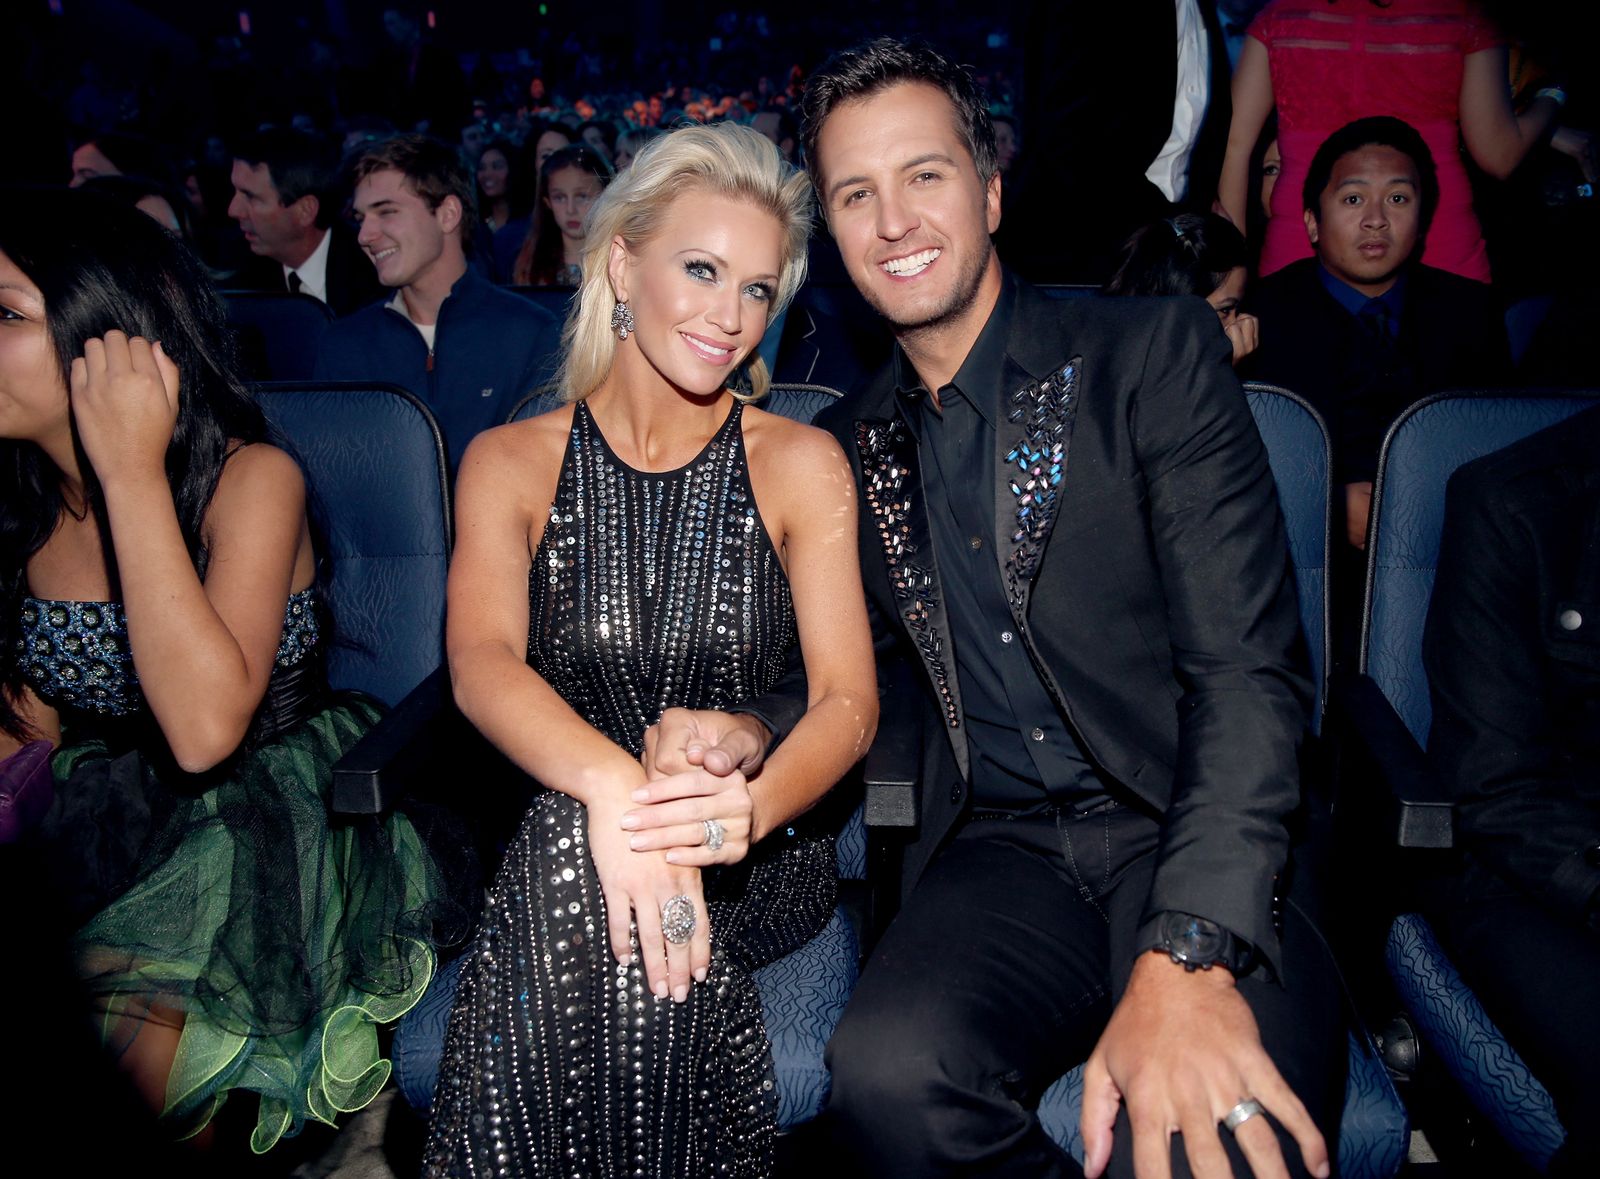 Luke Bryan and wife Caroline Bryan at the American Music Awards on November 24, 2013, in Los Angeles, California | Photo: Christopher Polk/AMA2013/Getty Images